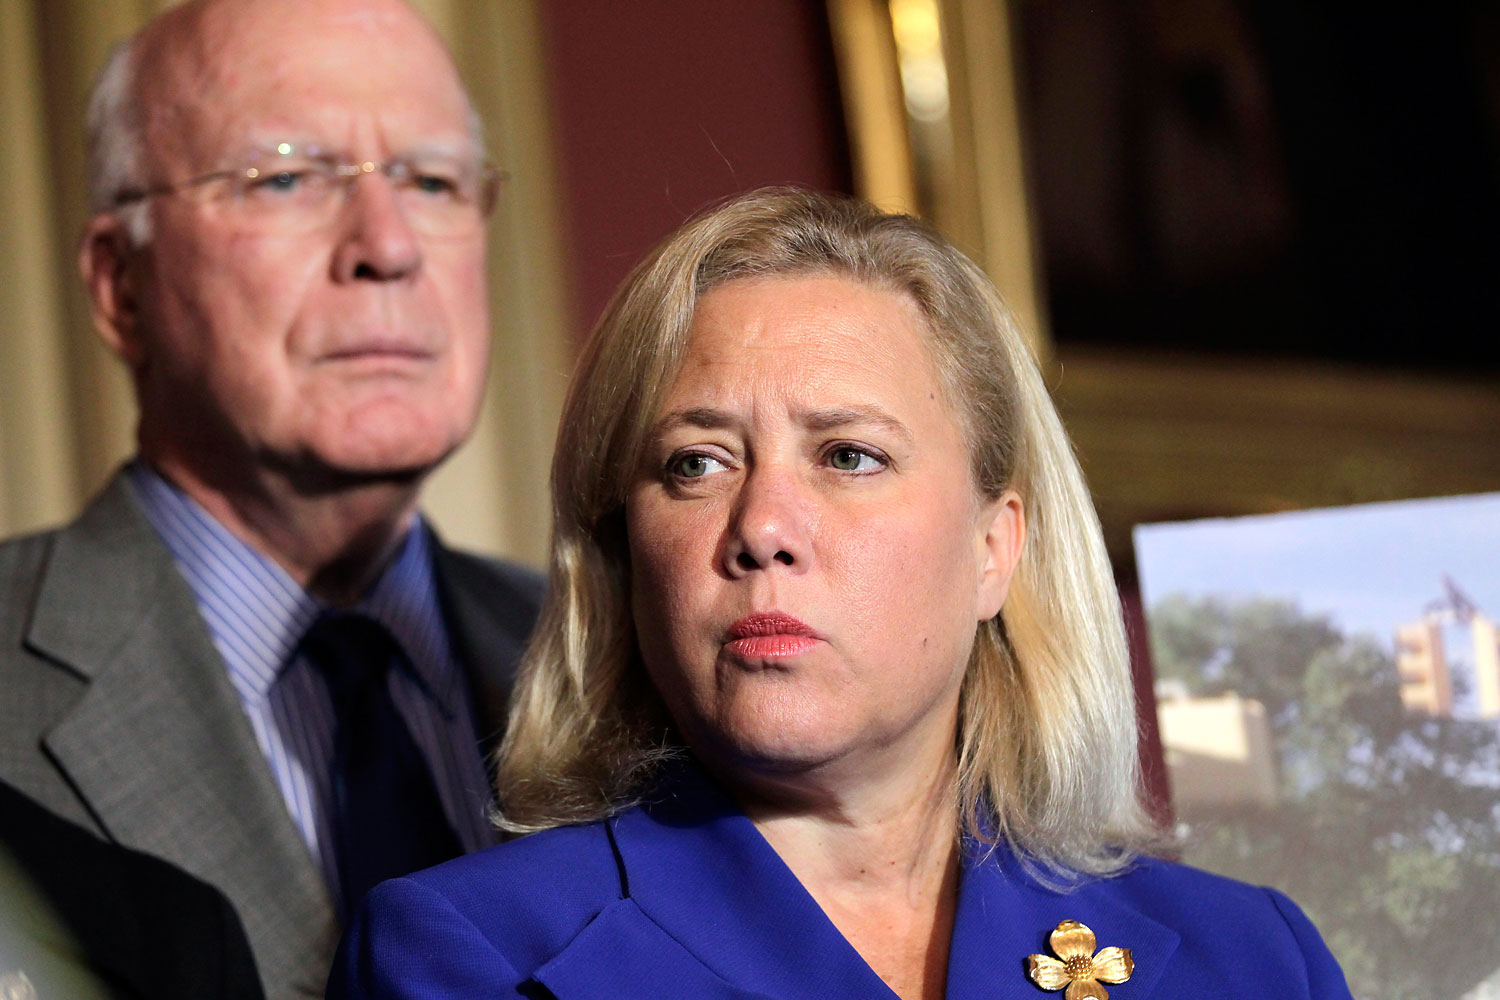 Sen. Mary Landrieu, D-La., right, joined by Sen. Patrick Leahy, D-Vt., left, urges funding for the Federal Emergency Management Agency as the agency is on track to run out of disaster relief funds after responding to a spate of natural disasters this year, most recently Hurricane Irene and Tropical Storm Lee, at the Capitol in Washington, Wednesday, Sept. 14, 2011. 